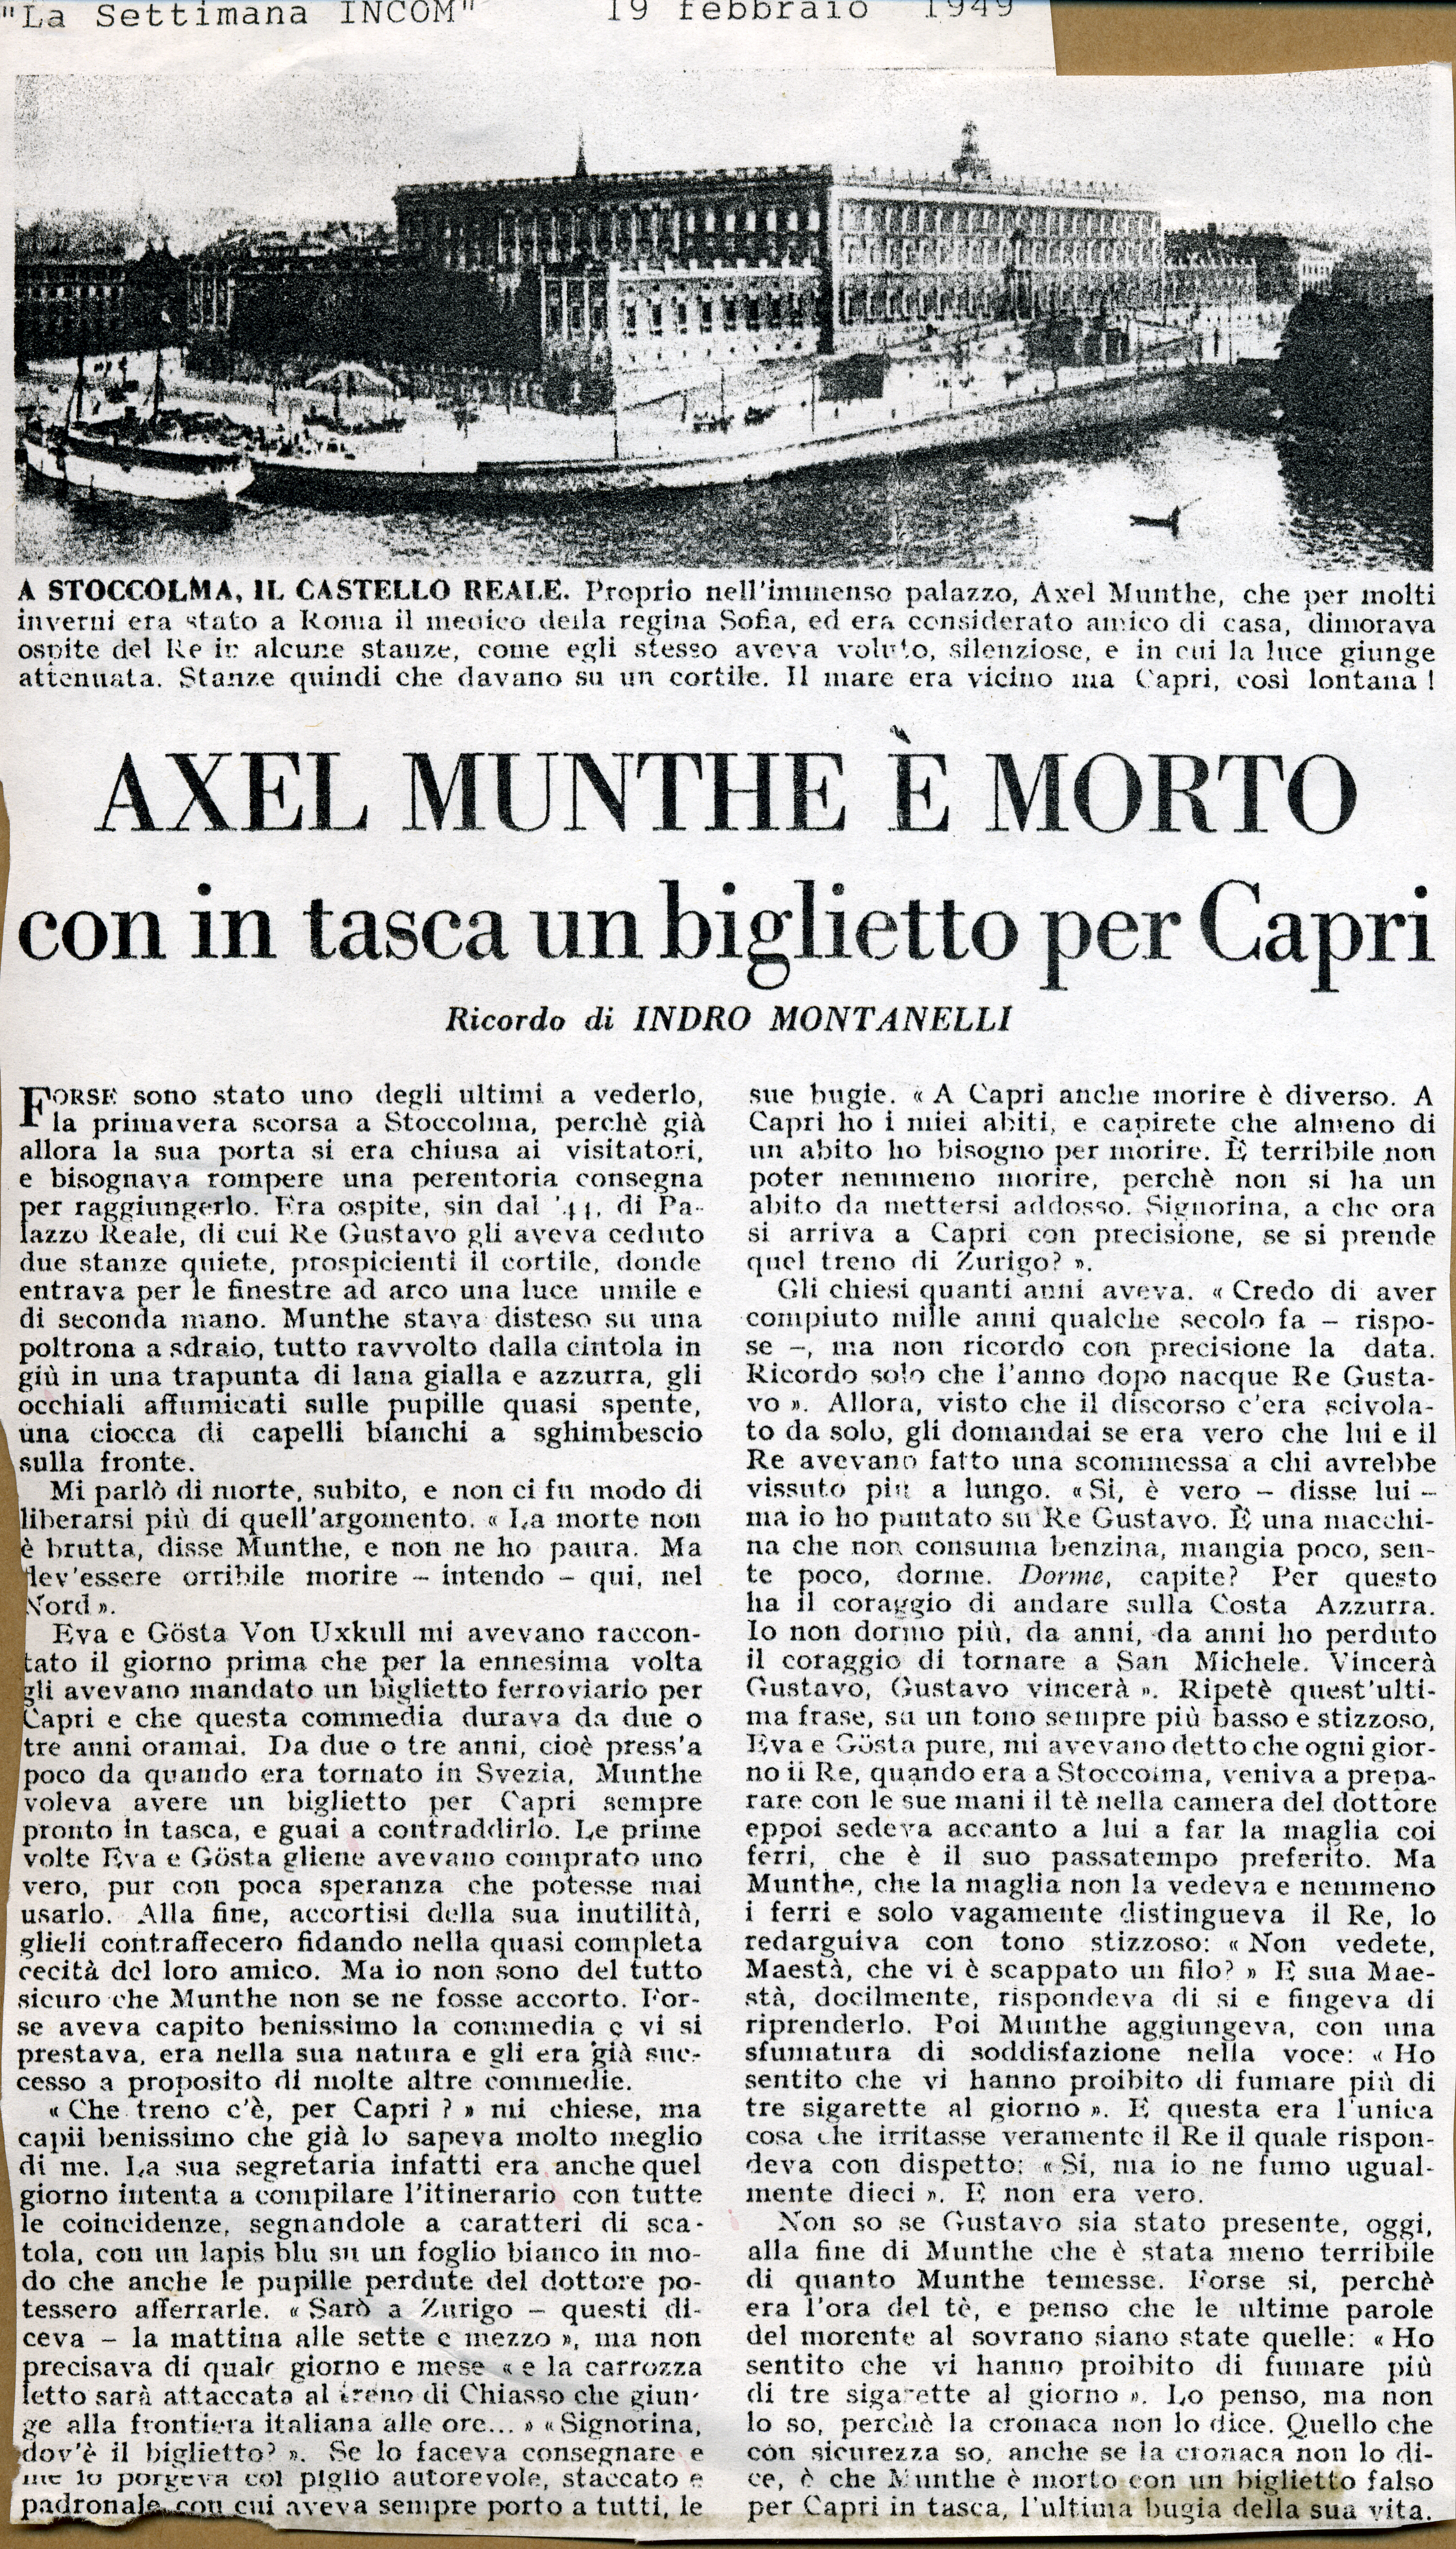 The article announcing Munthe’s death by the famous Italian journalist Indro Montanelli